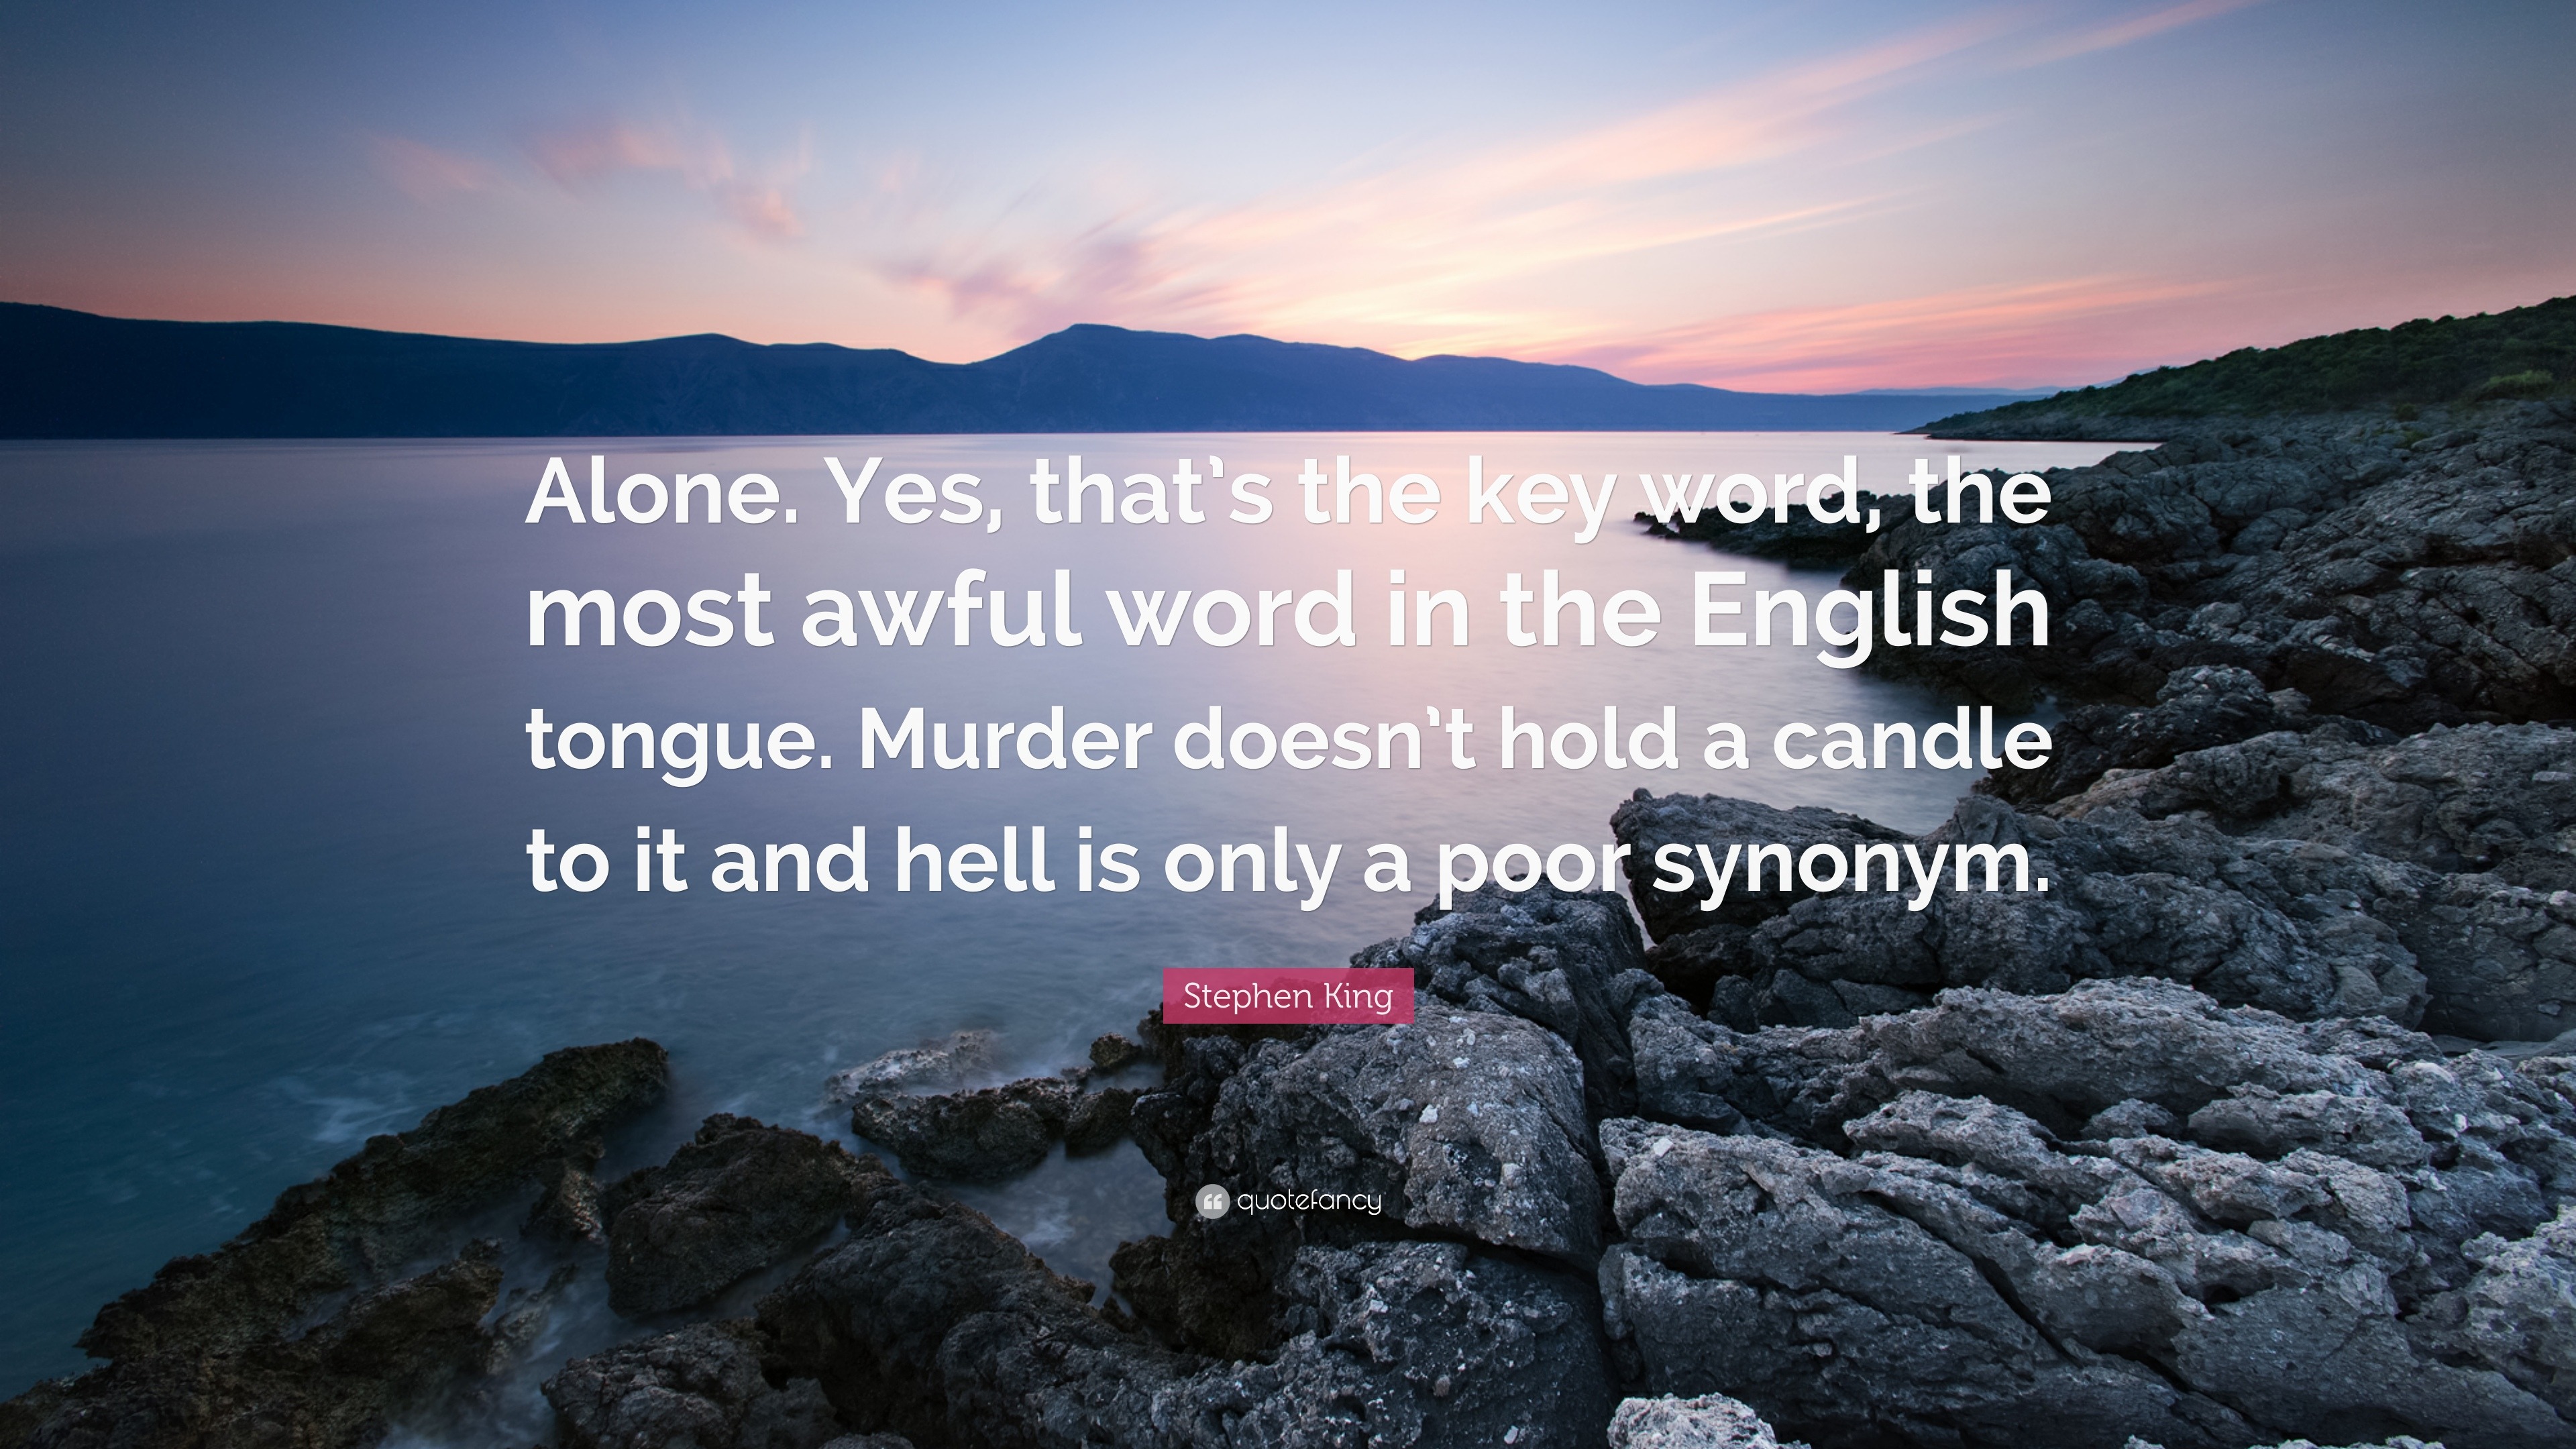 Alone. Yes, that's the key word, the most awful word in the